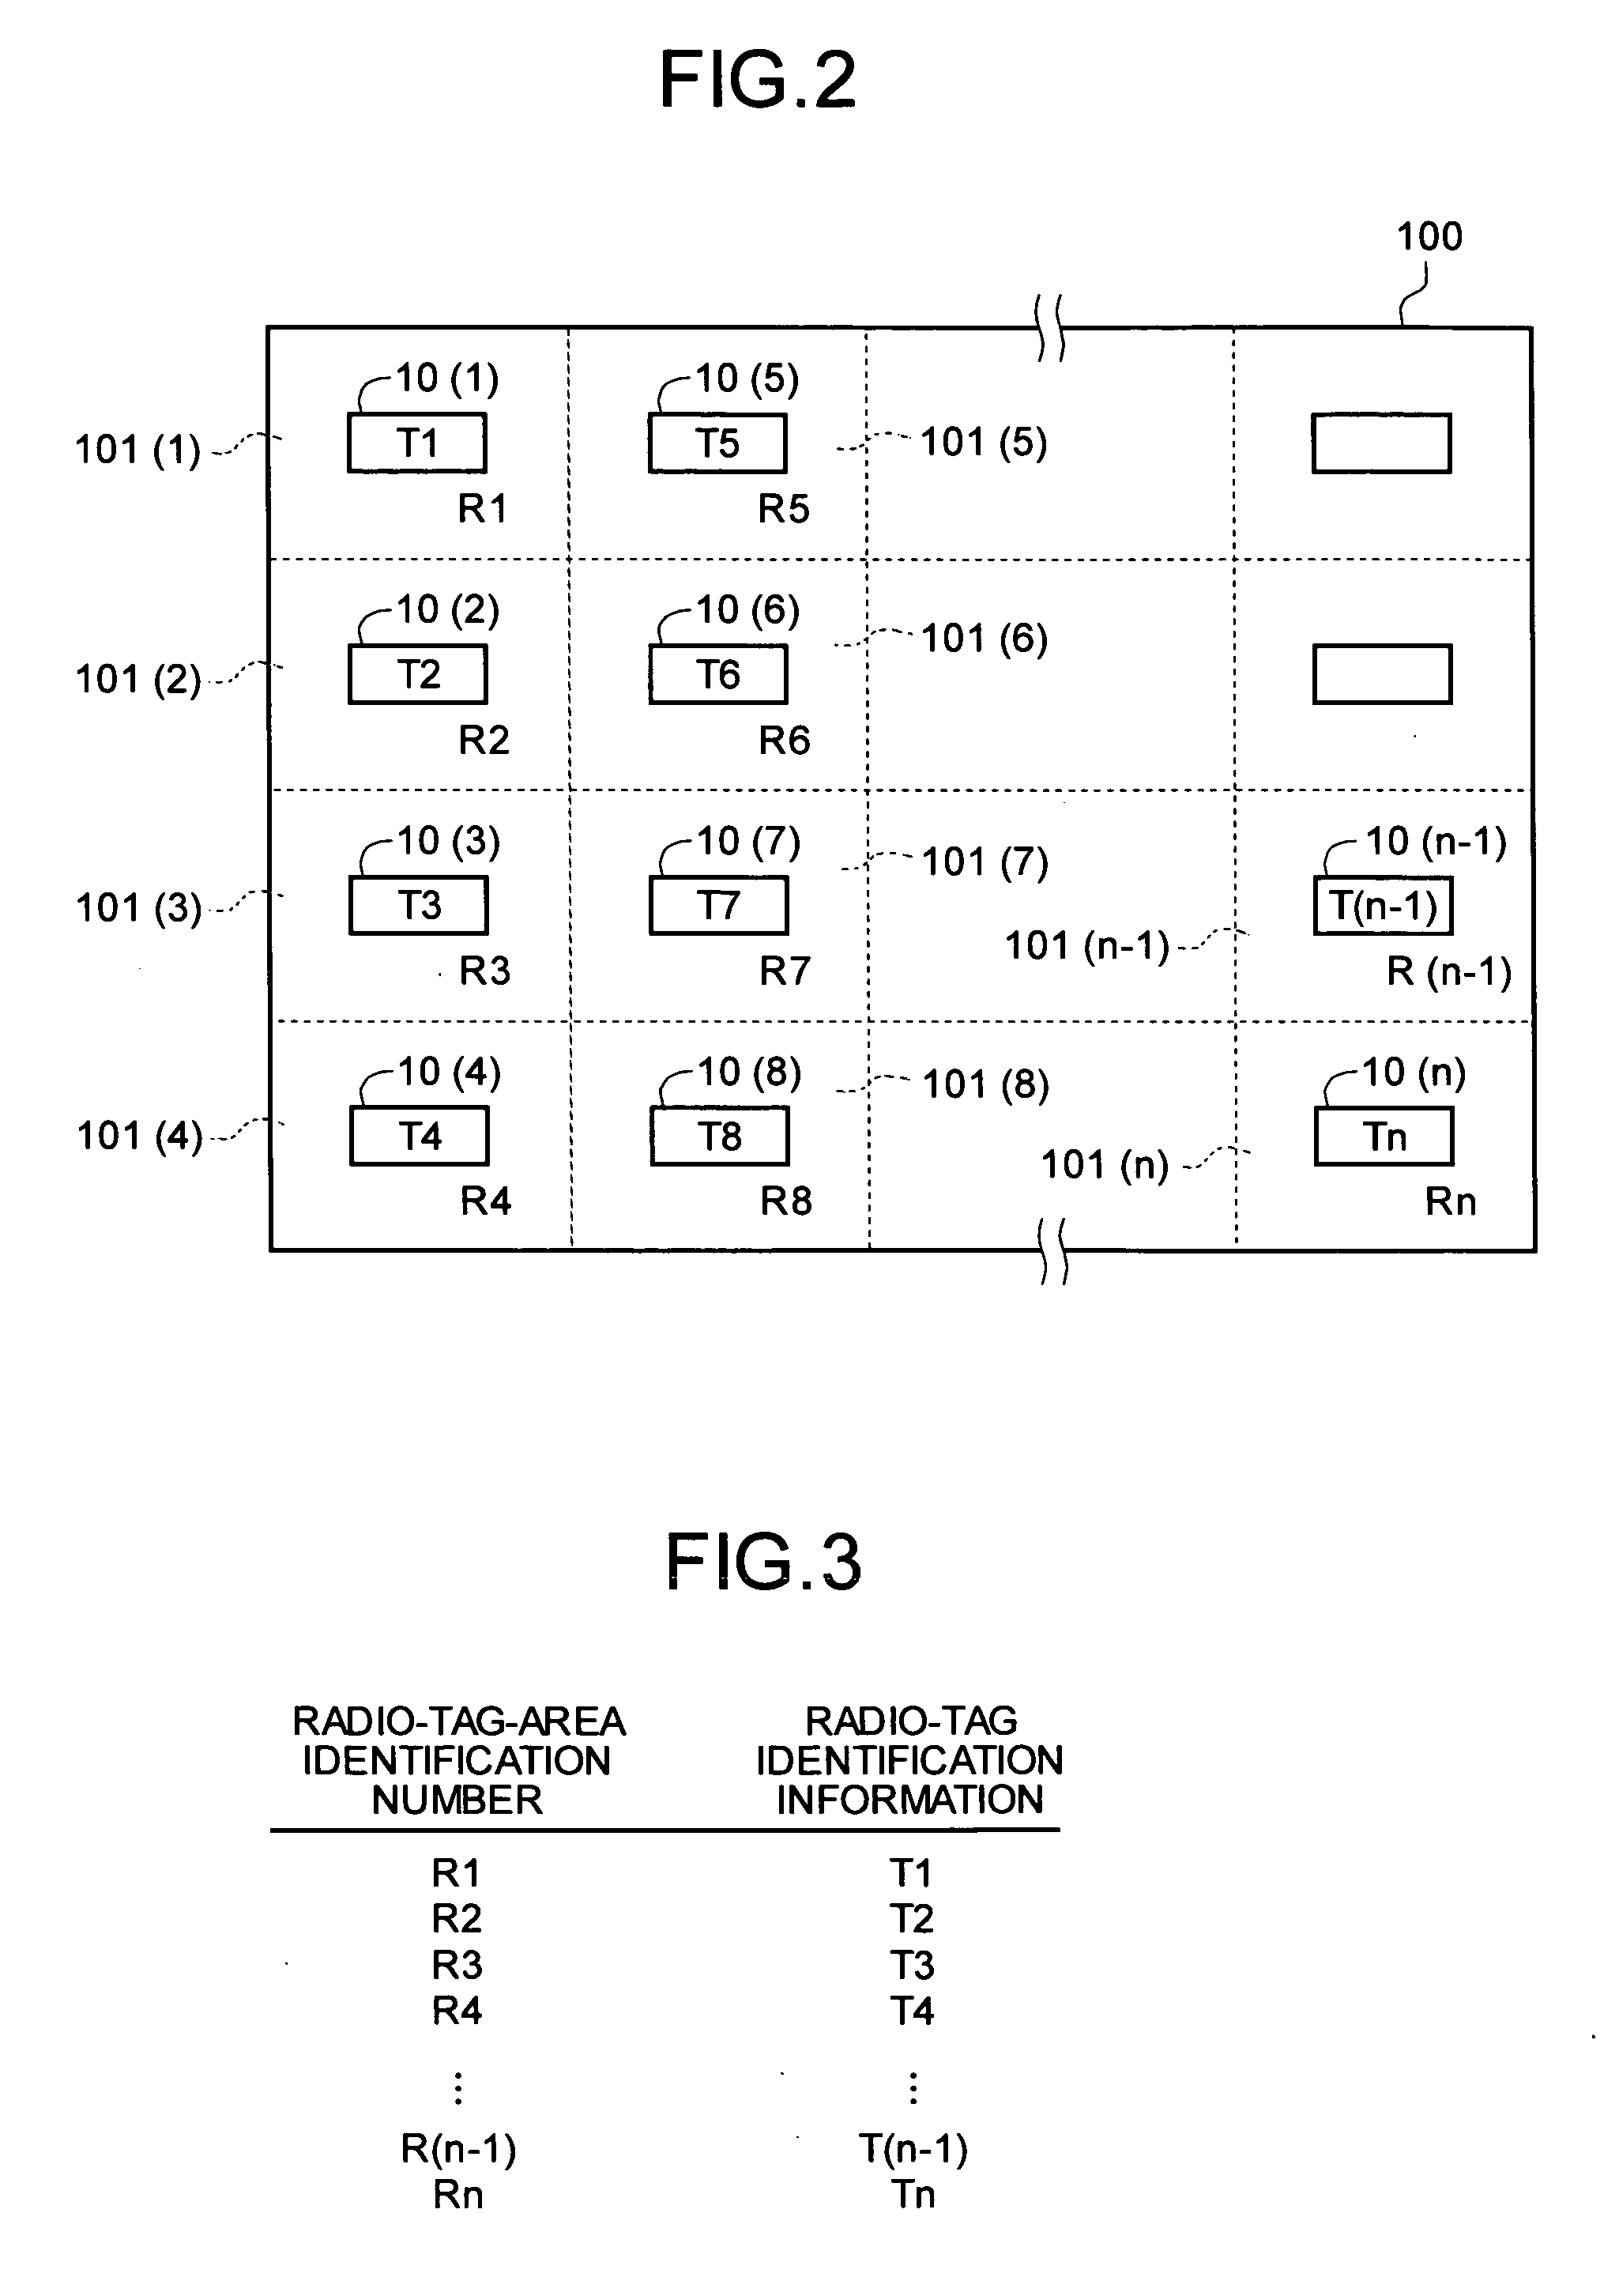 Place-Status Management System, Radio Tag Reader, and Managing Apparatus